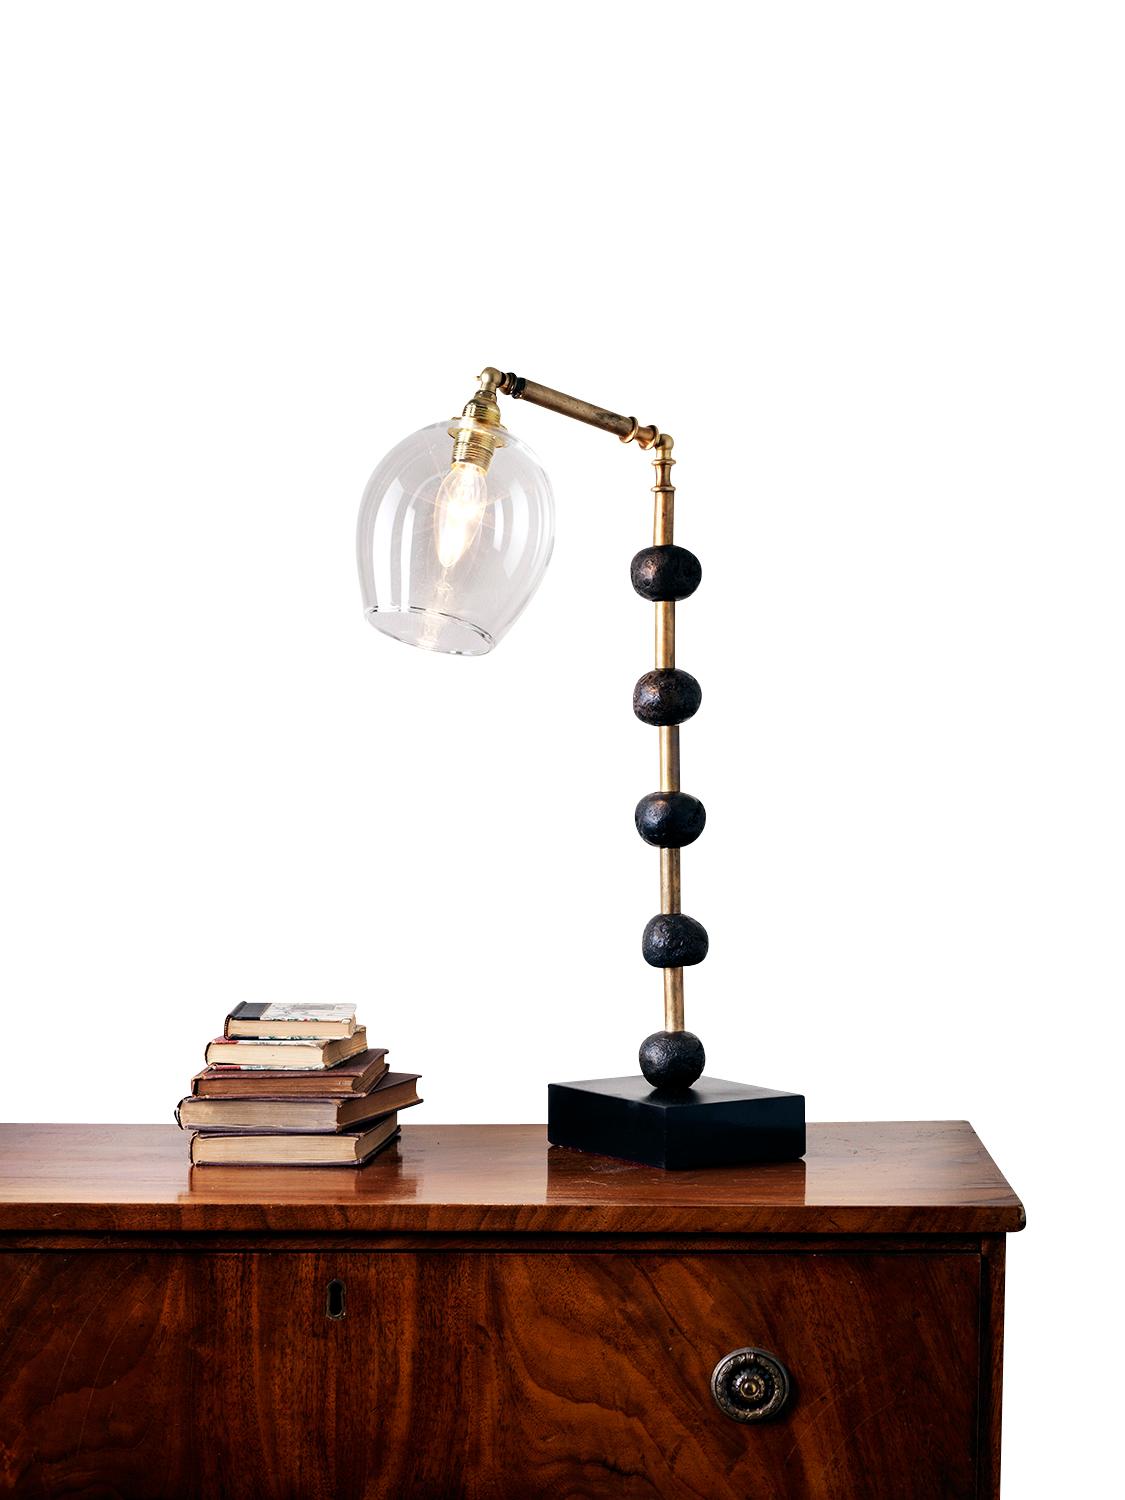 This contemporary Margit Wittig table lamp is mounted on a slate base and features multiple bronze resin handcrafted spheres. Each element is hand patinated to increase tonal contrast and enhance the surface texture.

This statement piece which will